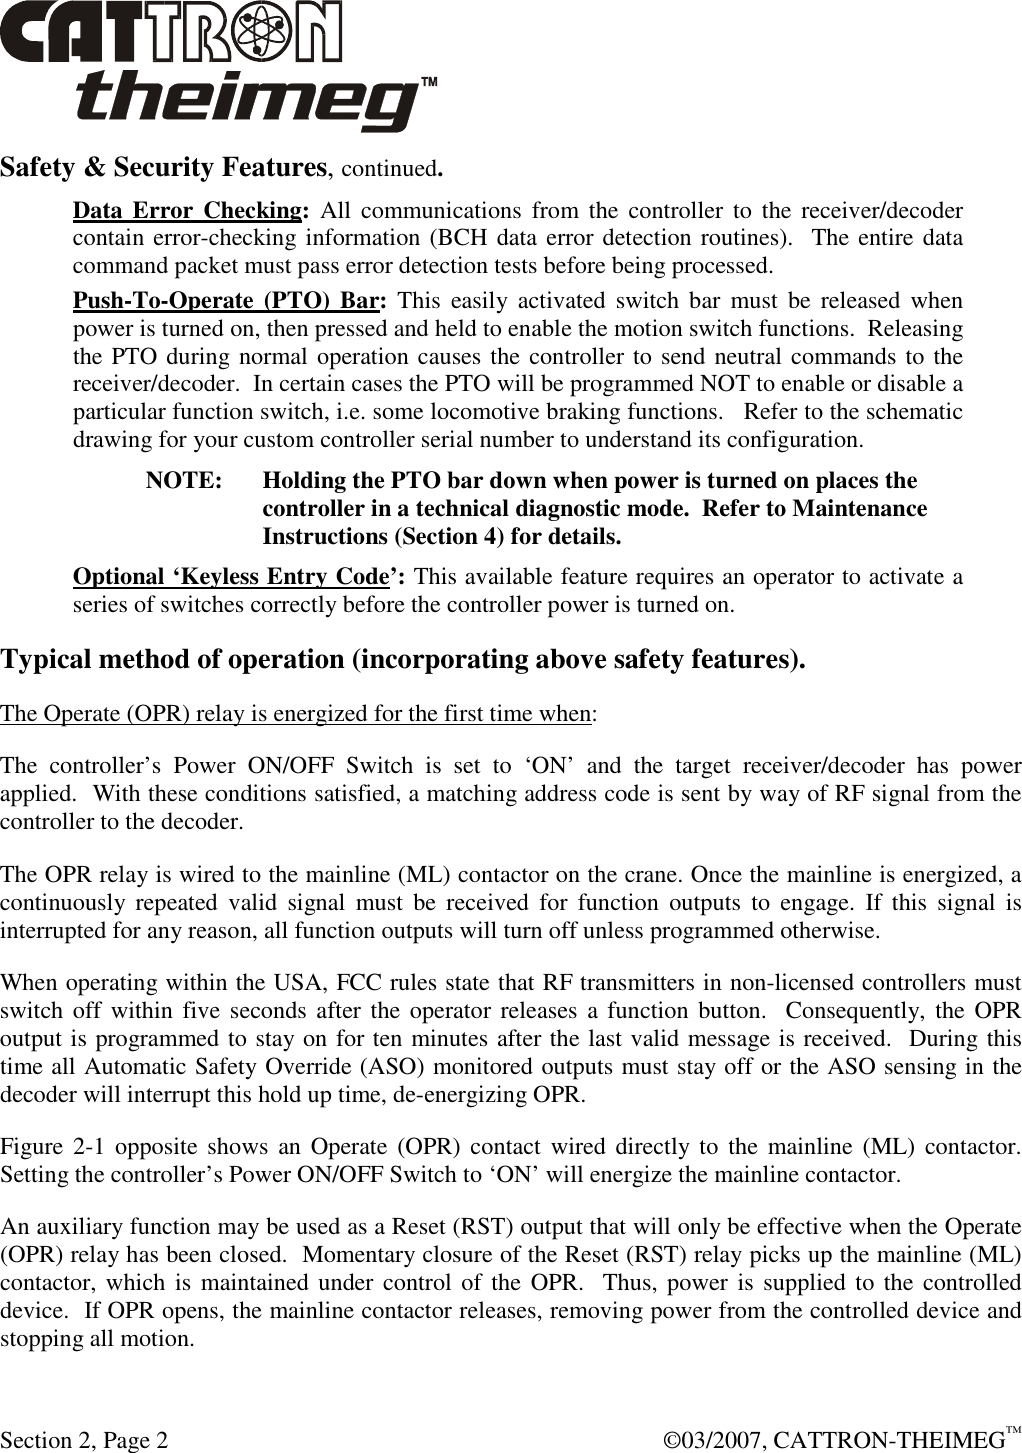  Section 2, Page 2    ©03/2007, CATTRON-THEIMEG™ Safety &amp; Security Features, continued. Data Error Checking:  All communications  from the controller to the receiver/decoder contain error-checking information (BCH data error detection routines).  The entire data command packet must pass error detection tests before being processed. Push-To-Operate (PTO) Bar: This  easily  activated  switch bar  must  be  released  when power is turned on, then pressed and held to enable the motion switch functions.  Releasing the PTO during normal operation causes the controller to send neutral commands to the receiver/decoder.  In certain cases the PTO will be programmed NOT to enable or disable a particular function switch, i.e. some locomotive braking functions.   Refer to the schematic drawing for your custom controller serial number to understand its configuration. NOTE:  Holding the PTO bar down when power is turned on places the controller in a technical diagnostic mode.  Refer to Maintenance Instructions (Section 4) for details. Optional ‘Keyless Entry Code’: This available feature requires an operator to activate a series of switches correctly before the controller power is turned on. Typical method of operation (incorporating above safety features). The Operate (OPR) relay is energized for the first time when: The  controller’s  Power  ON/OFF  Switch  is  set  to  ‘ON’  and  the  target  receiver/decoder  has  power applied.  With these conditions satisfied, a matching address code is sent by way of RF signal from the controller to the decoder. The OPR relay is wired to the mainline (ML) contactor on the crane. Once the mainline is energized, a continuously  repeated  valid  signal  must  be  received  for  function  outputs  to  engage.  If  this  signal  is interrupted for any reason, all function outputs will turn off unless programmed otherwise.  When operating within the USA, FCC rules state that RF transmitters in non-licensed controllers must switch off  within five seconds after the operator  releases a function button.   Consequently, the  OPR output is programmed to stay on for ten minutes after the last valid message is received.  During this time all Automatic Safety Override (ASO) monitored outputs must stay off or the ASO sensing in the decoder will interrupt this hold up time, de-energizing OPR. Figure 2-1  opposite  shows  an Operate (OPR) contact wired  directly to the mainline  (ML)  contactor. Setting the controller’s Power ON/OFF Switch to ‘ON’ will energize the mainline contactor. An auxiliary function may be used as a Reset (RST) output that will only be effective when the Operate (OPR) relay has been closed.  Momentary closure of the Reset (RST) relay picks up the mainline (ML) contactor, which  is maintained  under control of the  OPR.  Thus, power  is supplied to the controlled device.  If OPR opens, the mainline contactor releases, removing power from the controlled device and stopping all motion. 